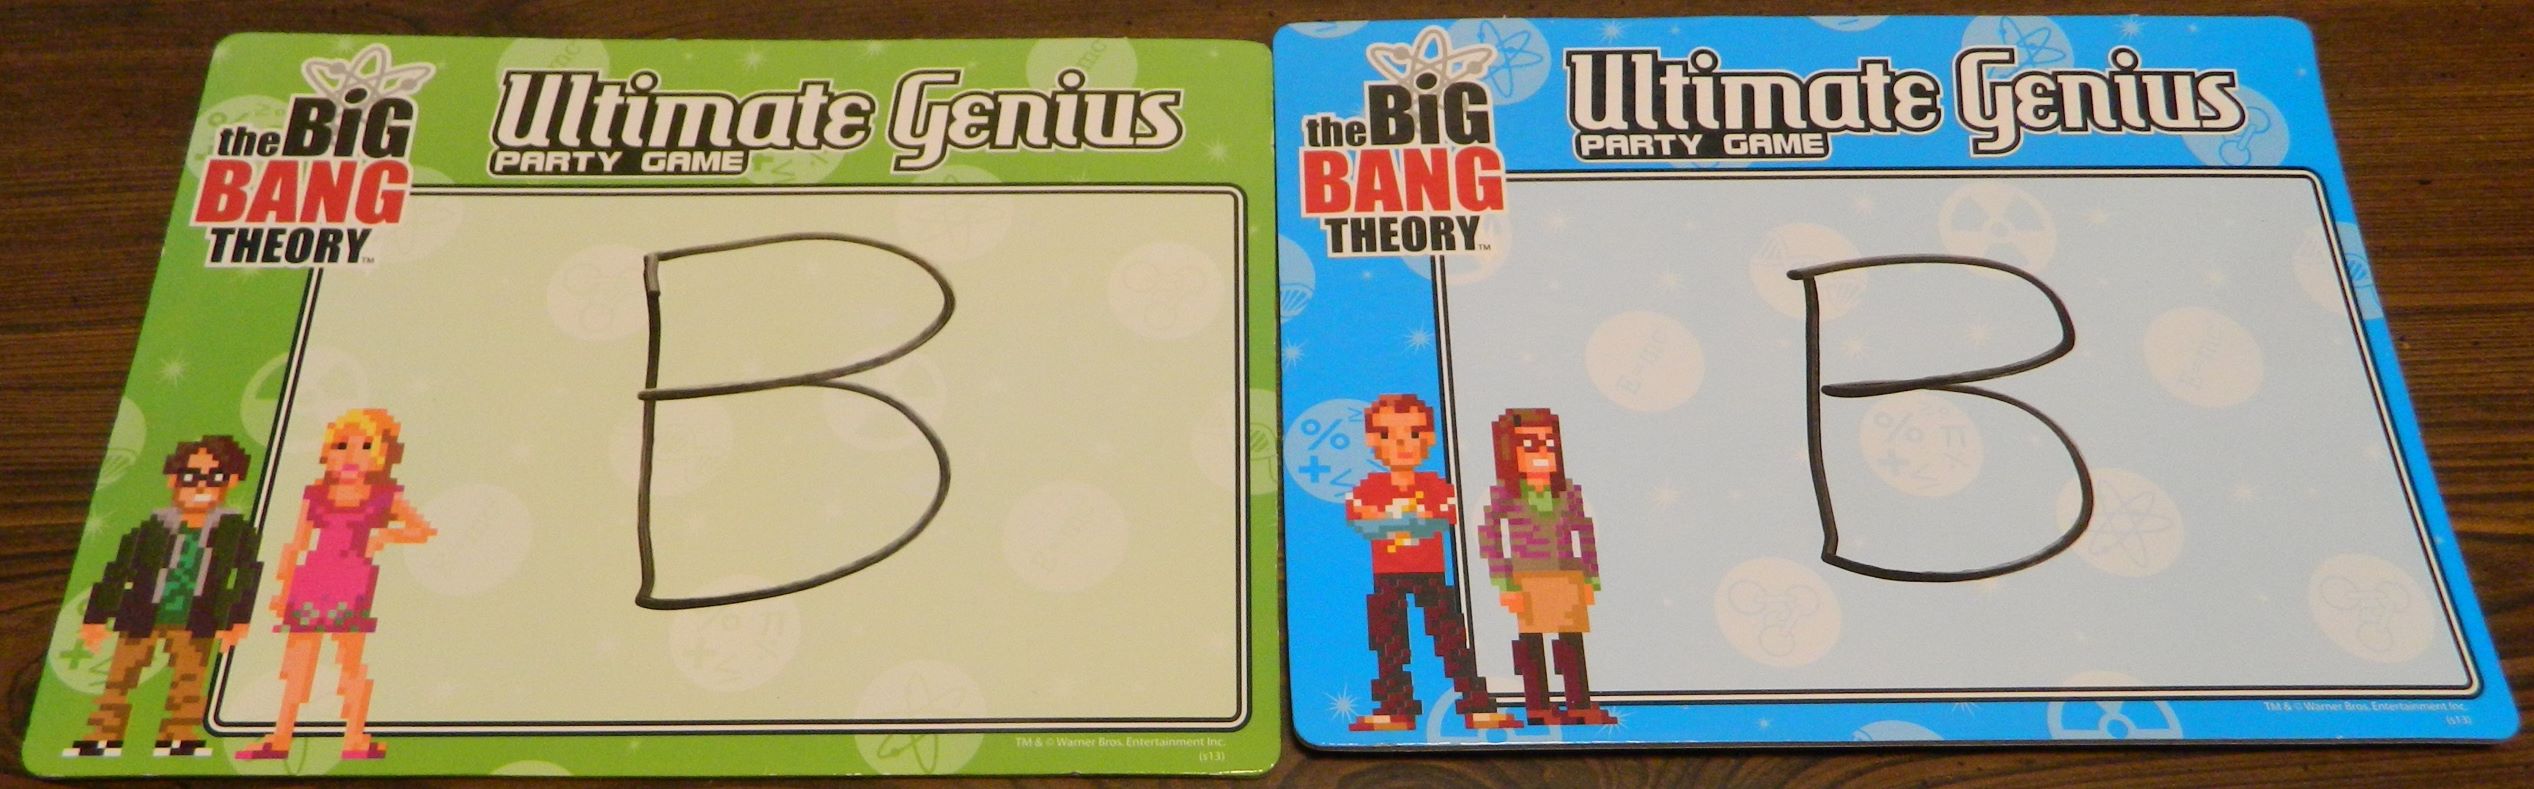 The Big Bang Theory Ultimate Genius Party Game Cardinal Ages 8 for sale online 